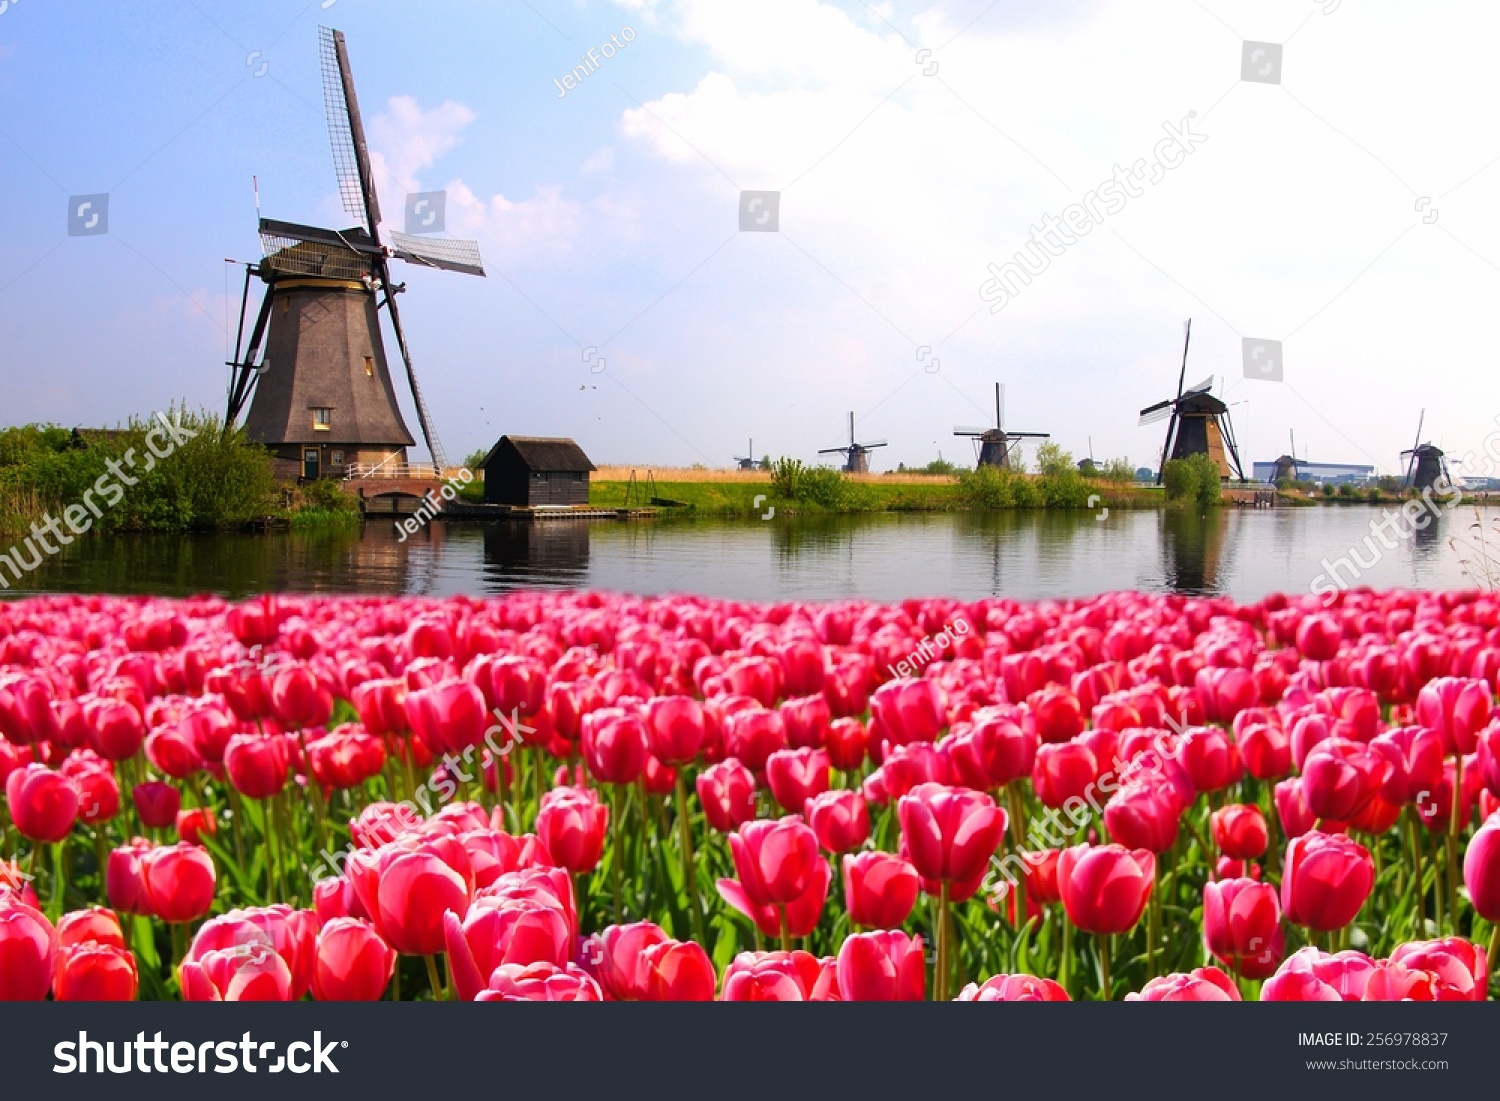 Vibrant pink tulips with Dutch windmills along a canal, Netherlands #256978837